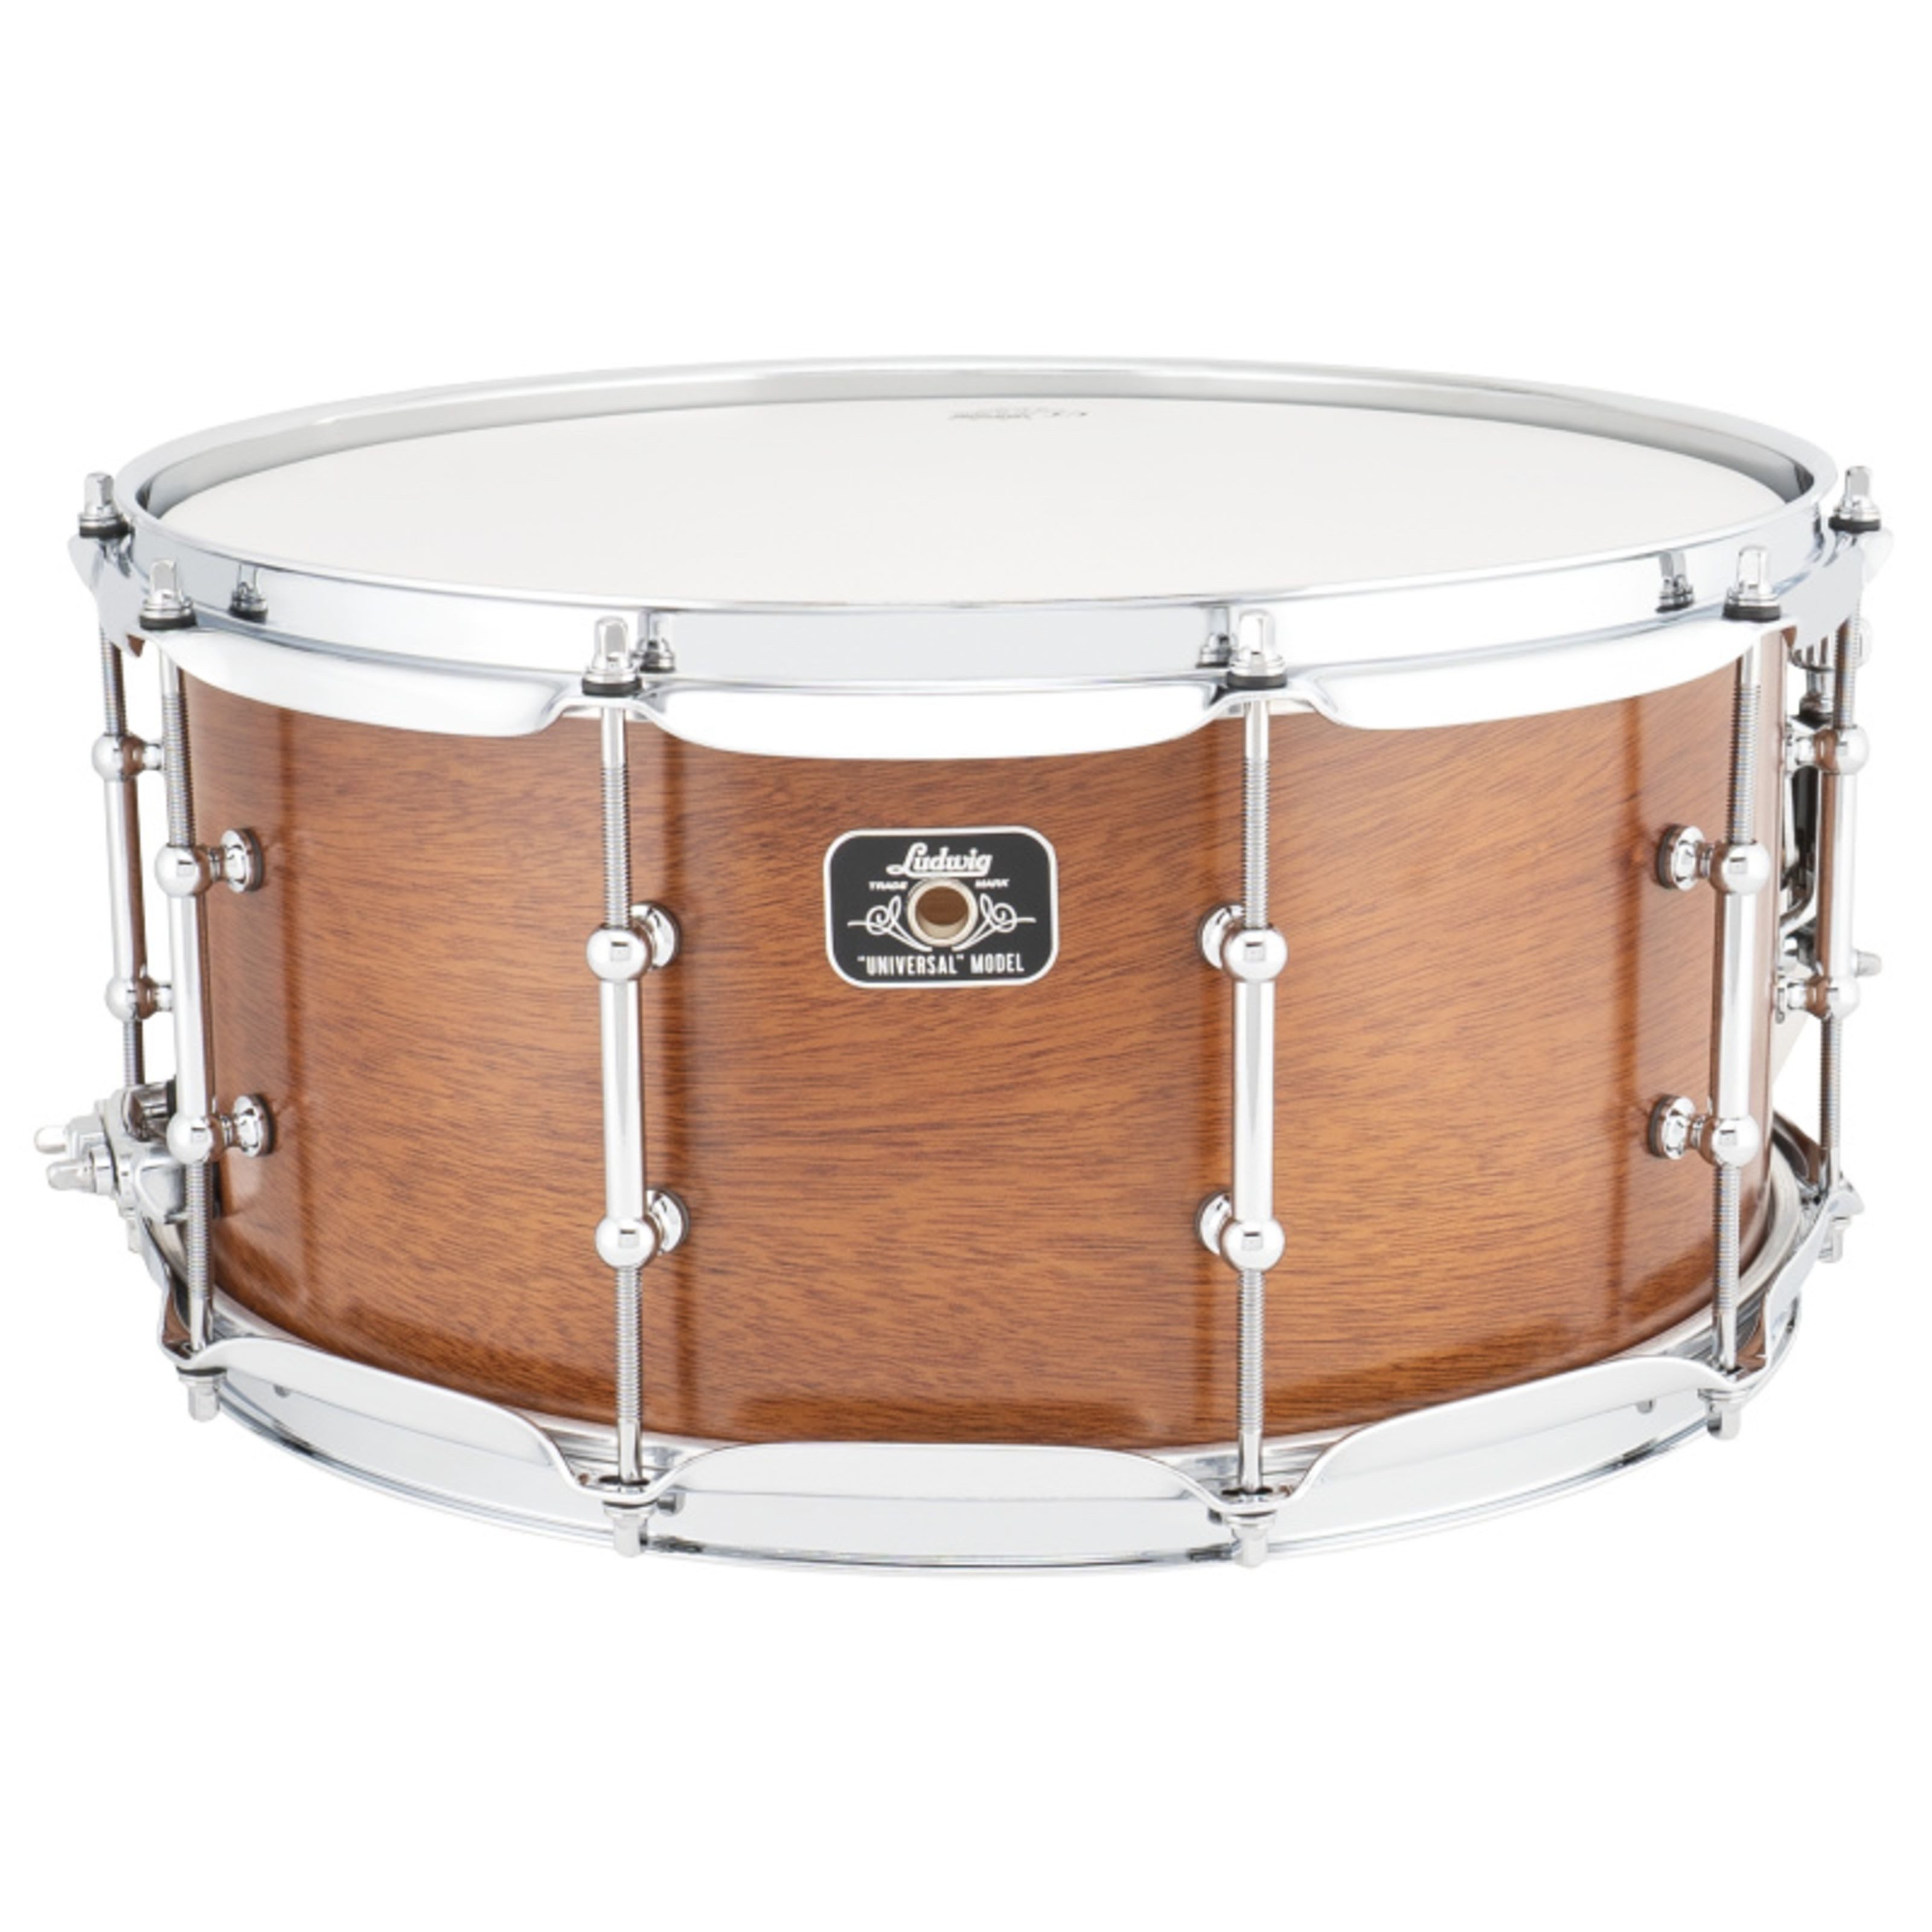 Ludwig Snare Drum, Schlagzeuge, Snare Drums, LU6514MA Universal Mahogany Snare 14"x6,5" - Snare Drum